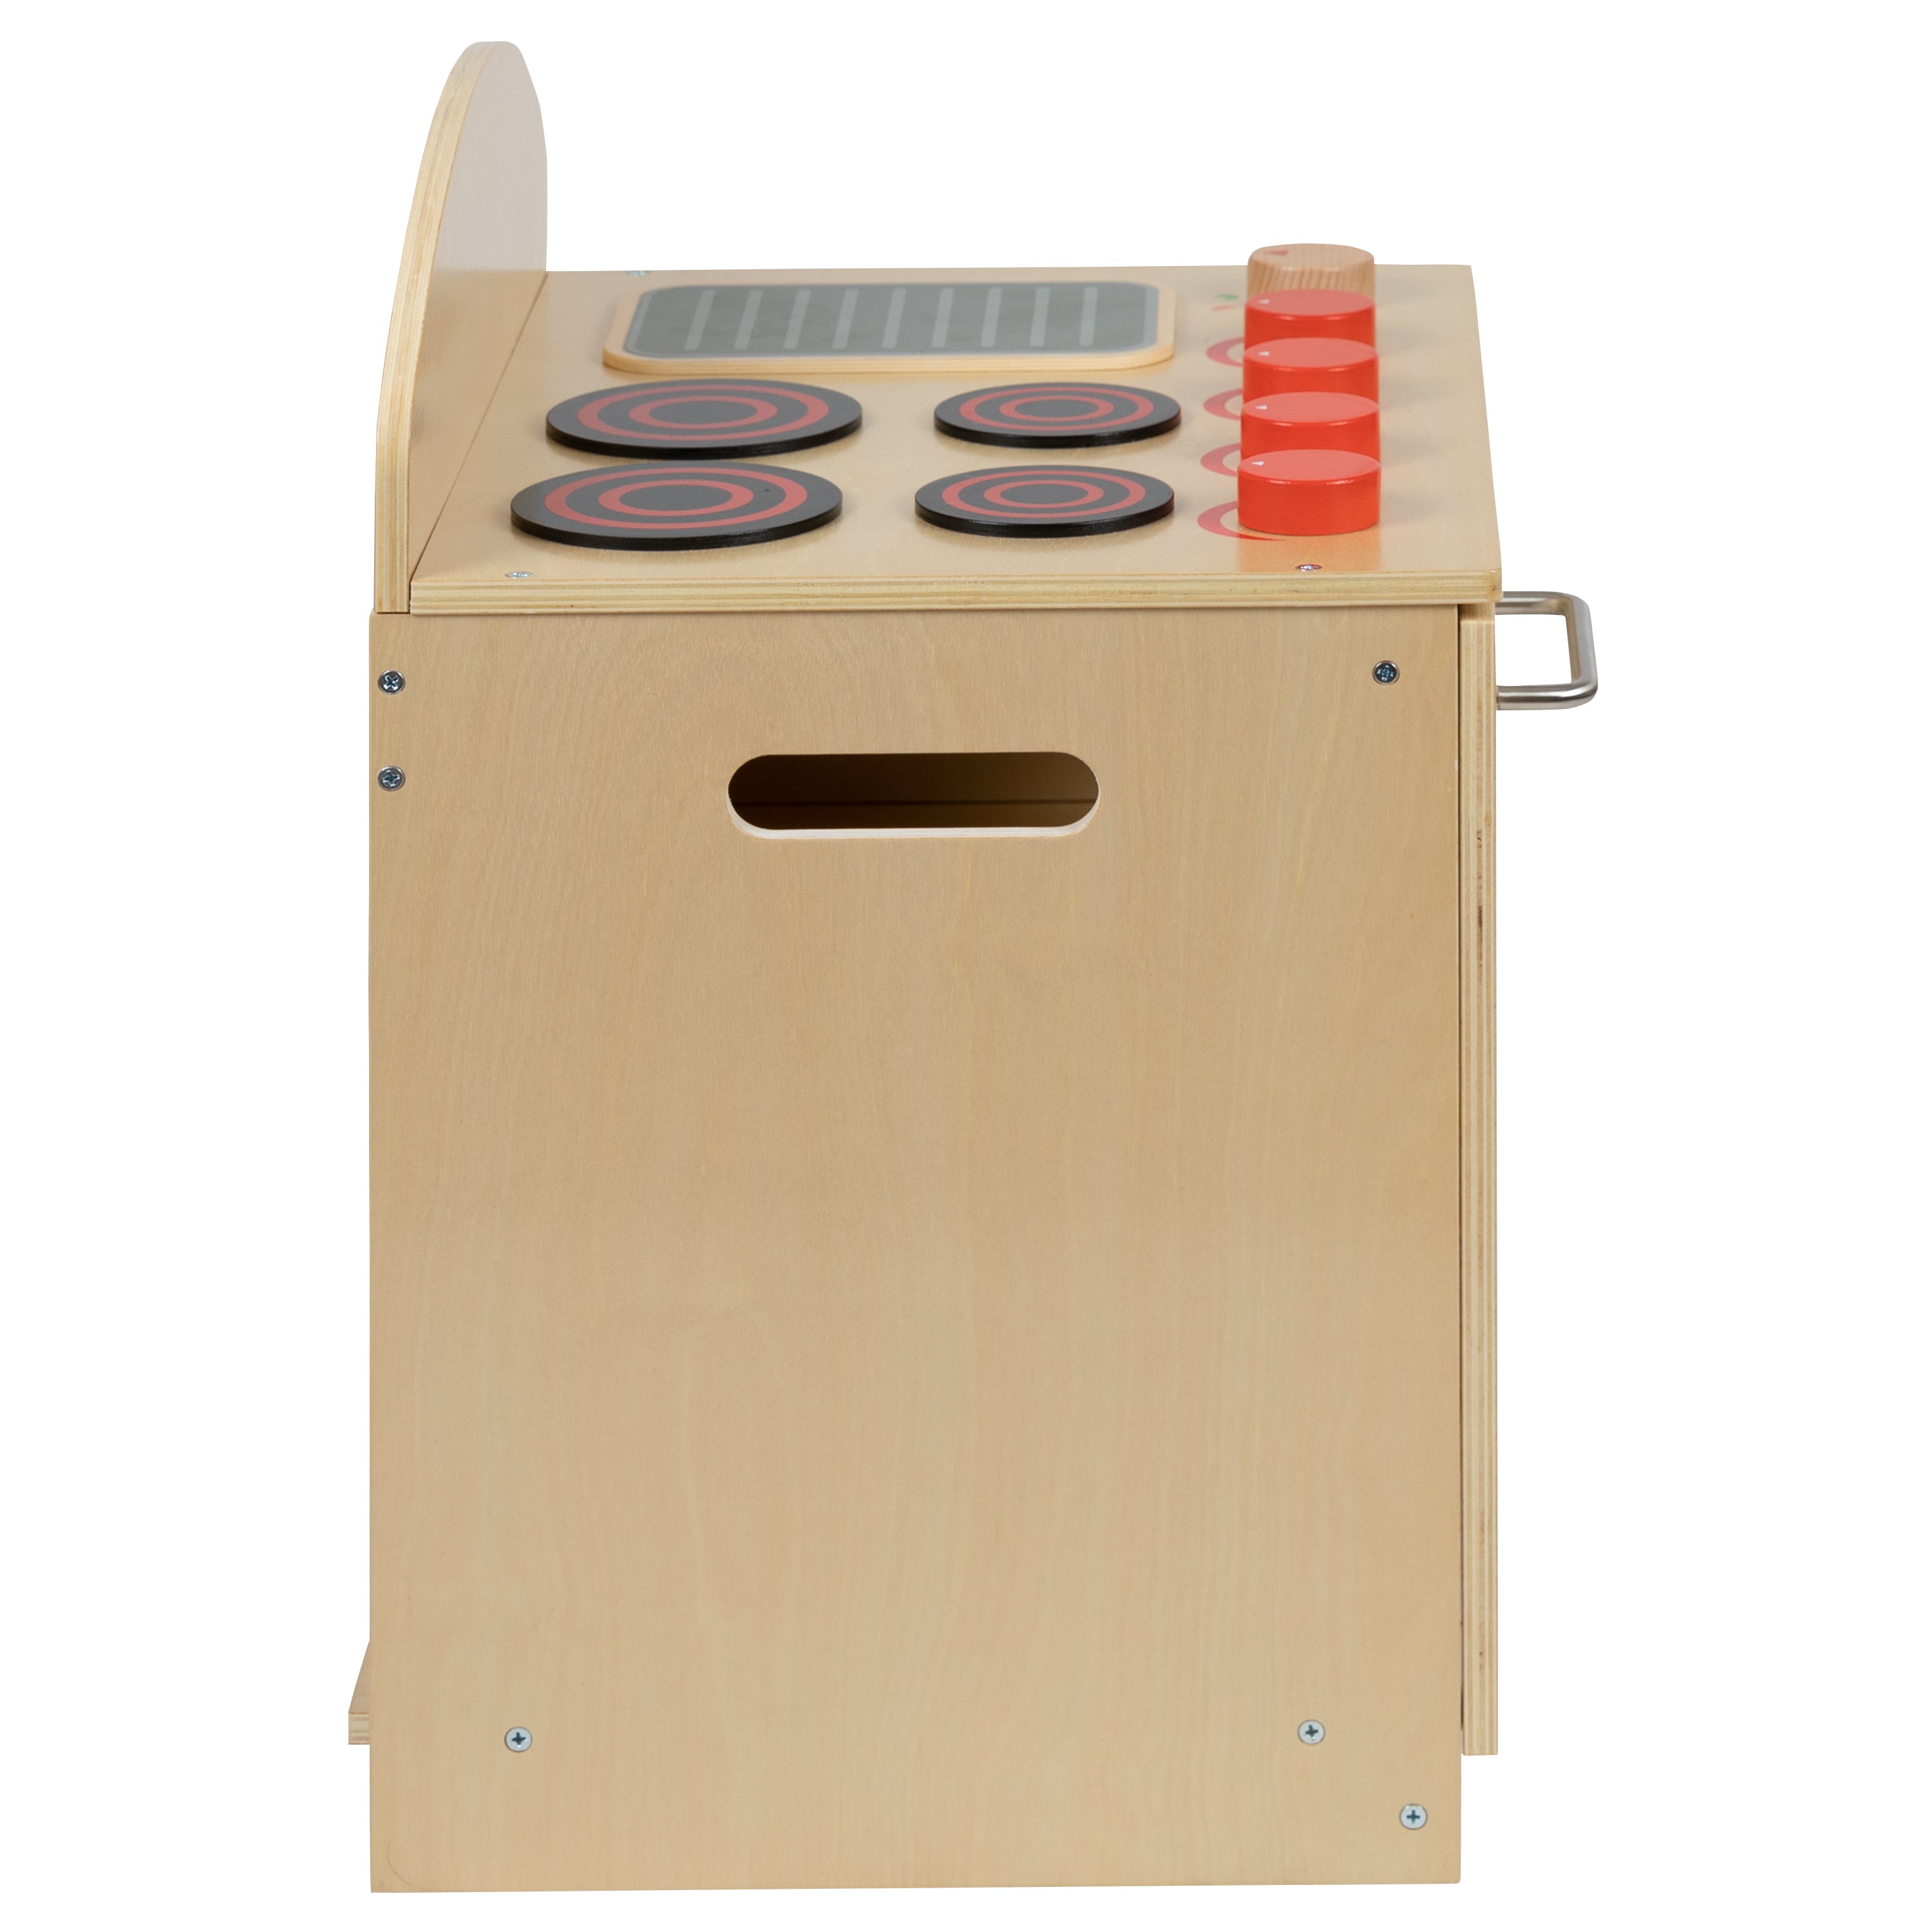 Children's Wooden Kitchen Stove for Commercial or Home Use - Safe, Kid Friendly Design-Dramatic Play-Flash Furniture-Wall2Wall Furnishings